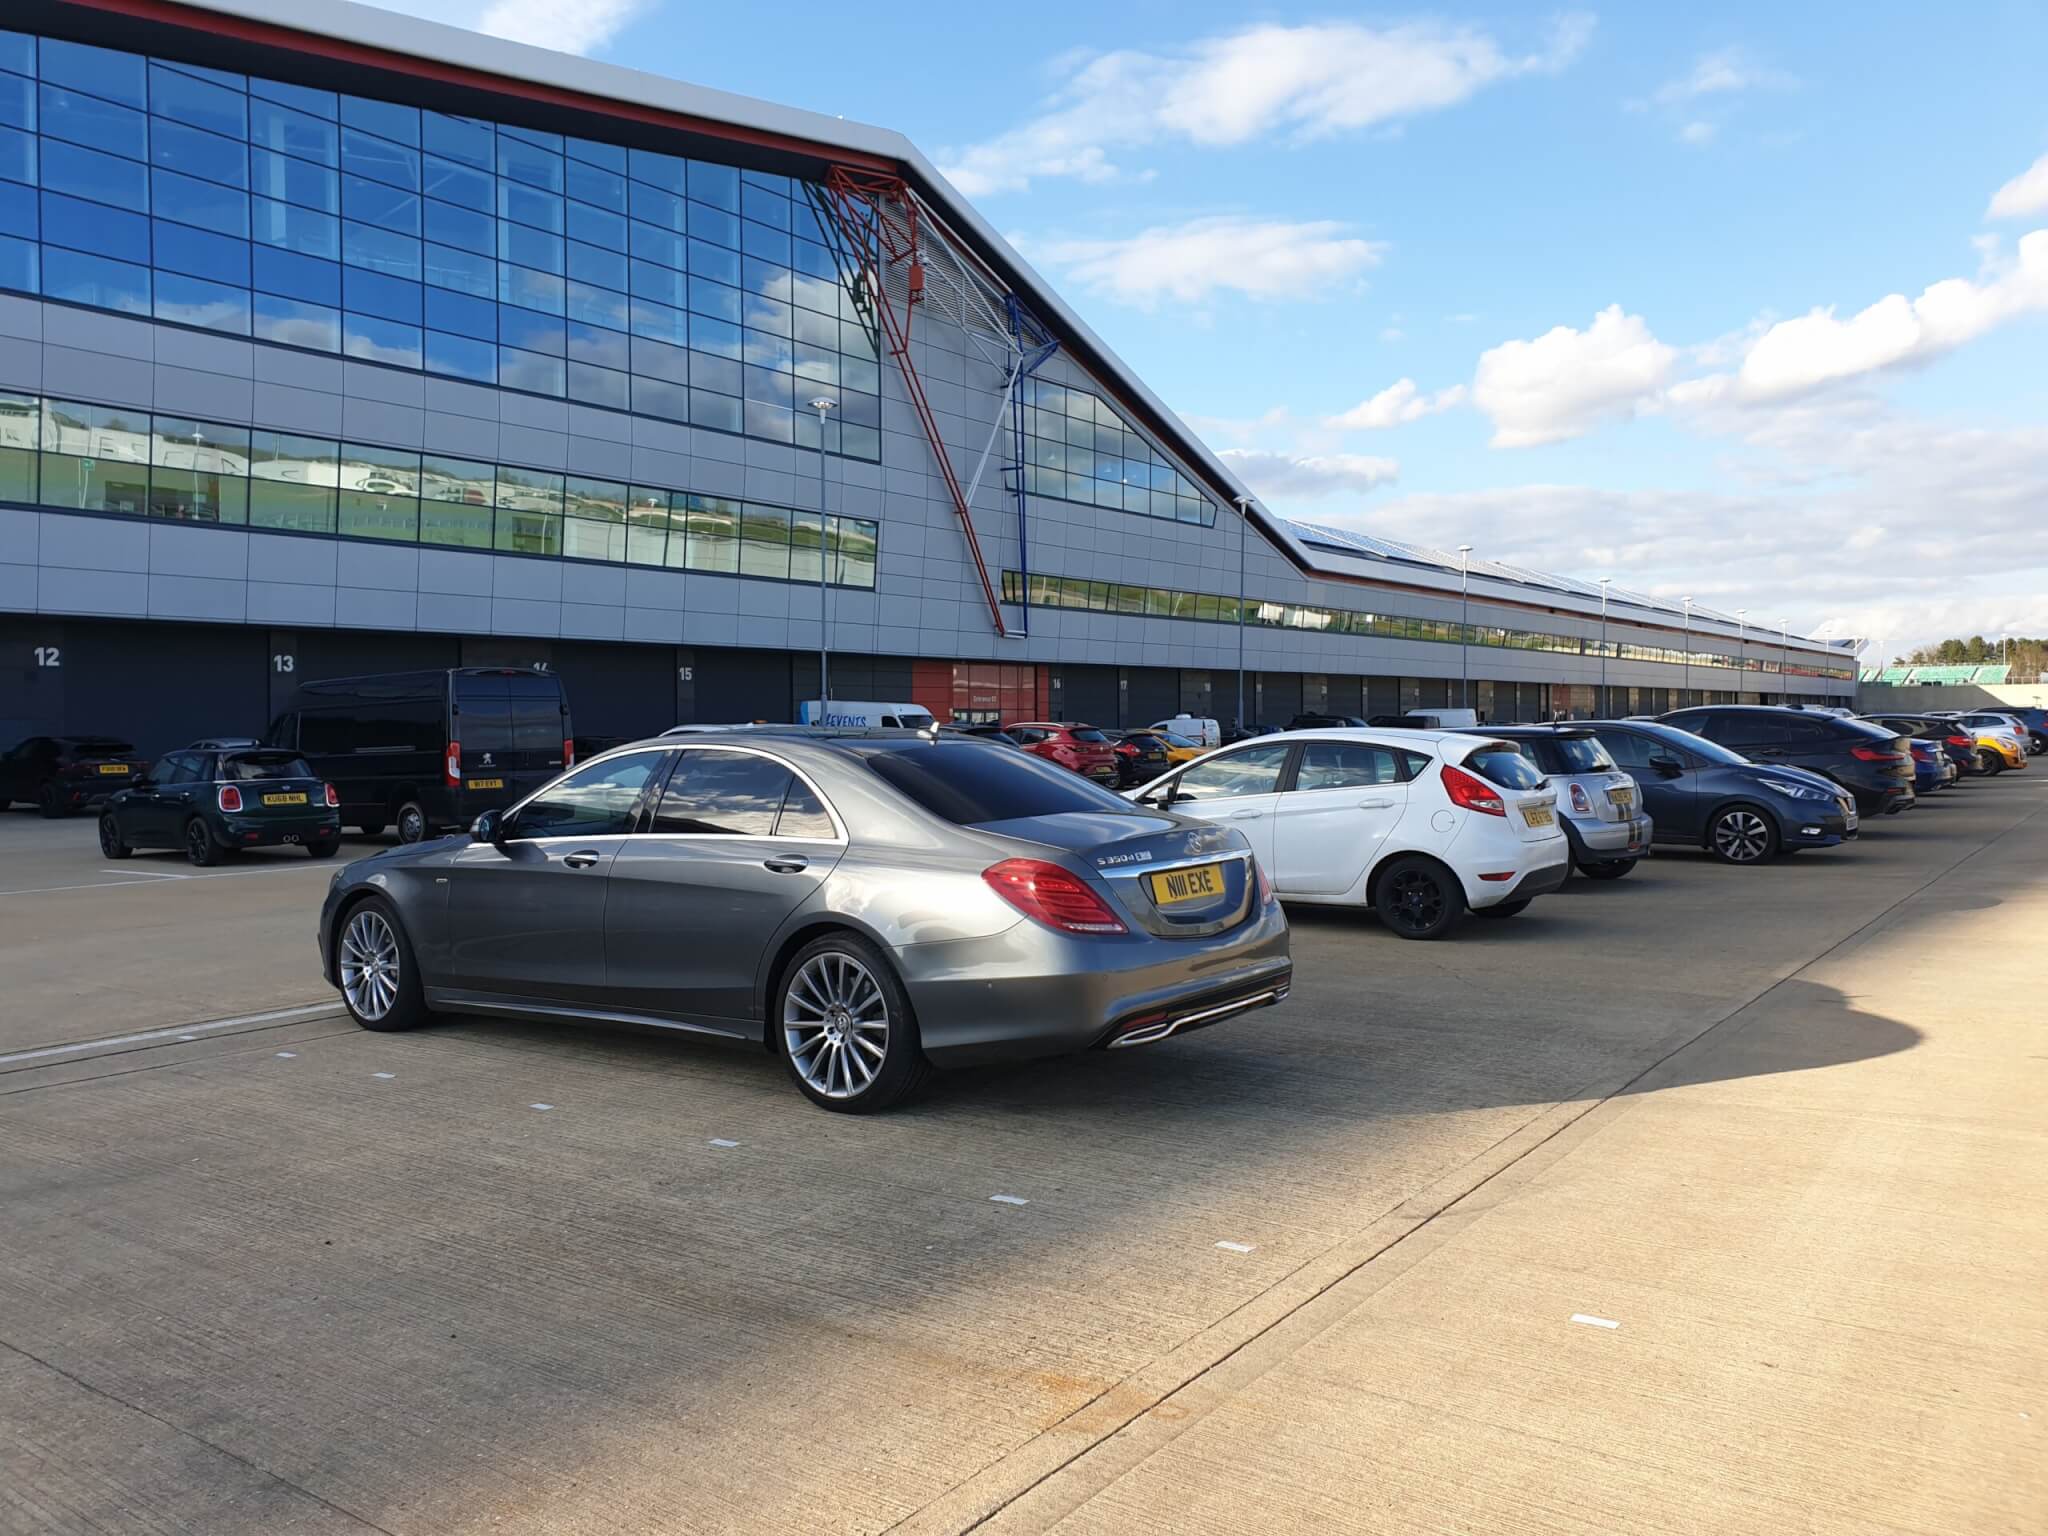 Our new Mercedes s class at Silverstone Race Circuit